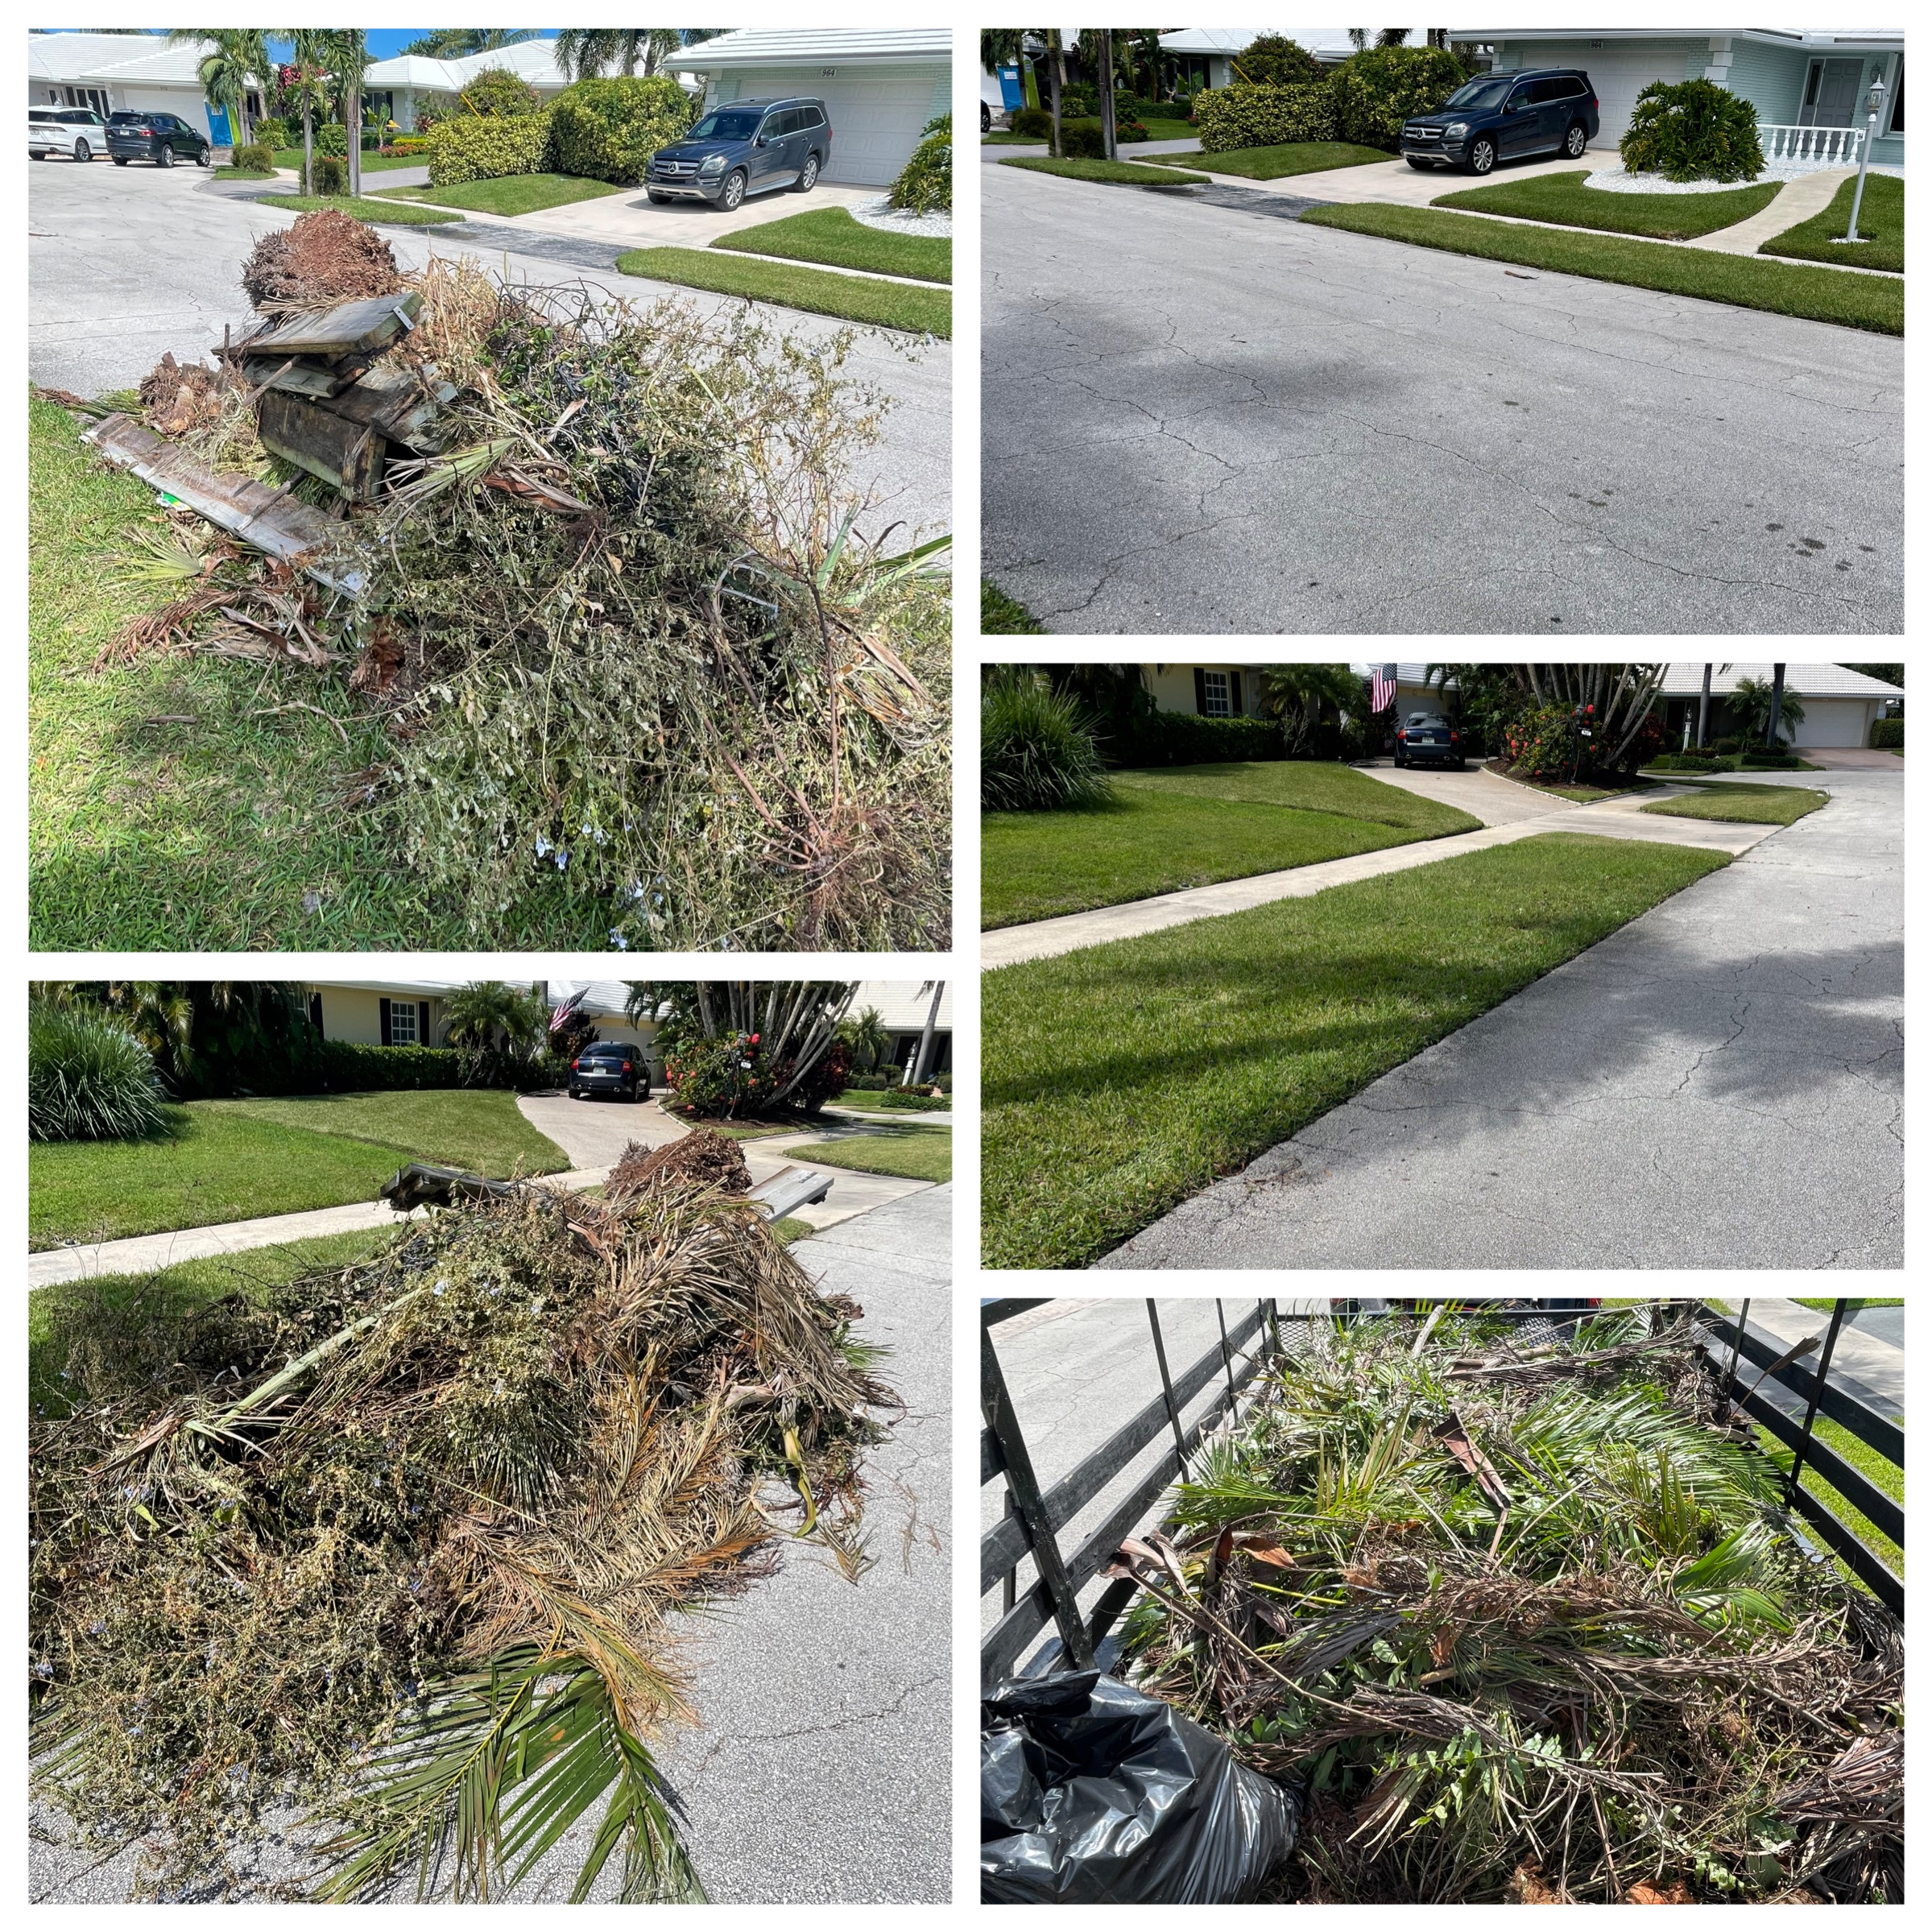 Palm fronds, Planter wooden boarders, roots, and other vegetation debris getting removed from street curb in Jupiter, Florida.